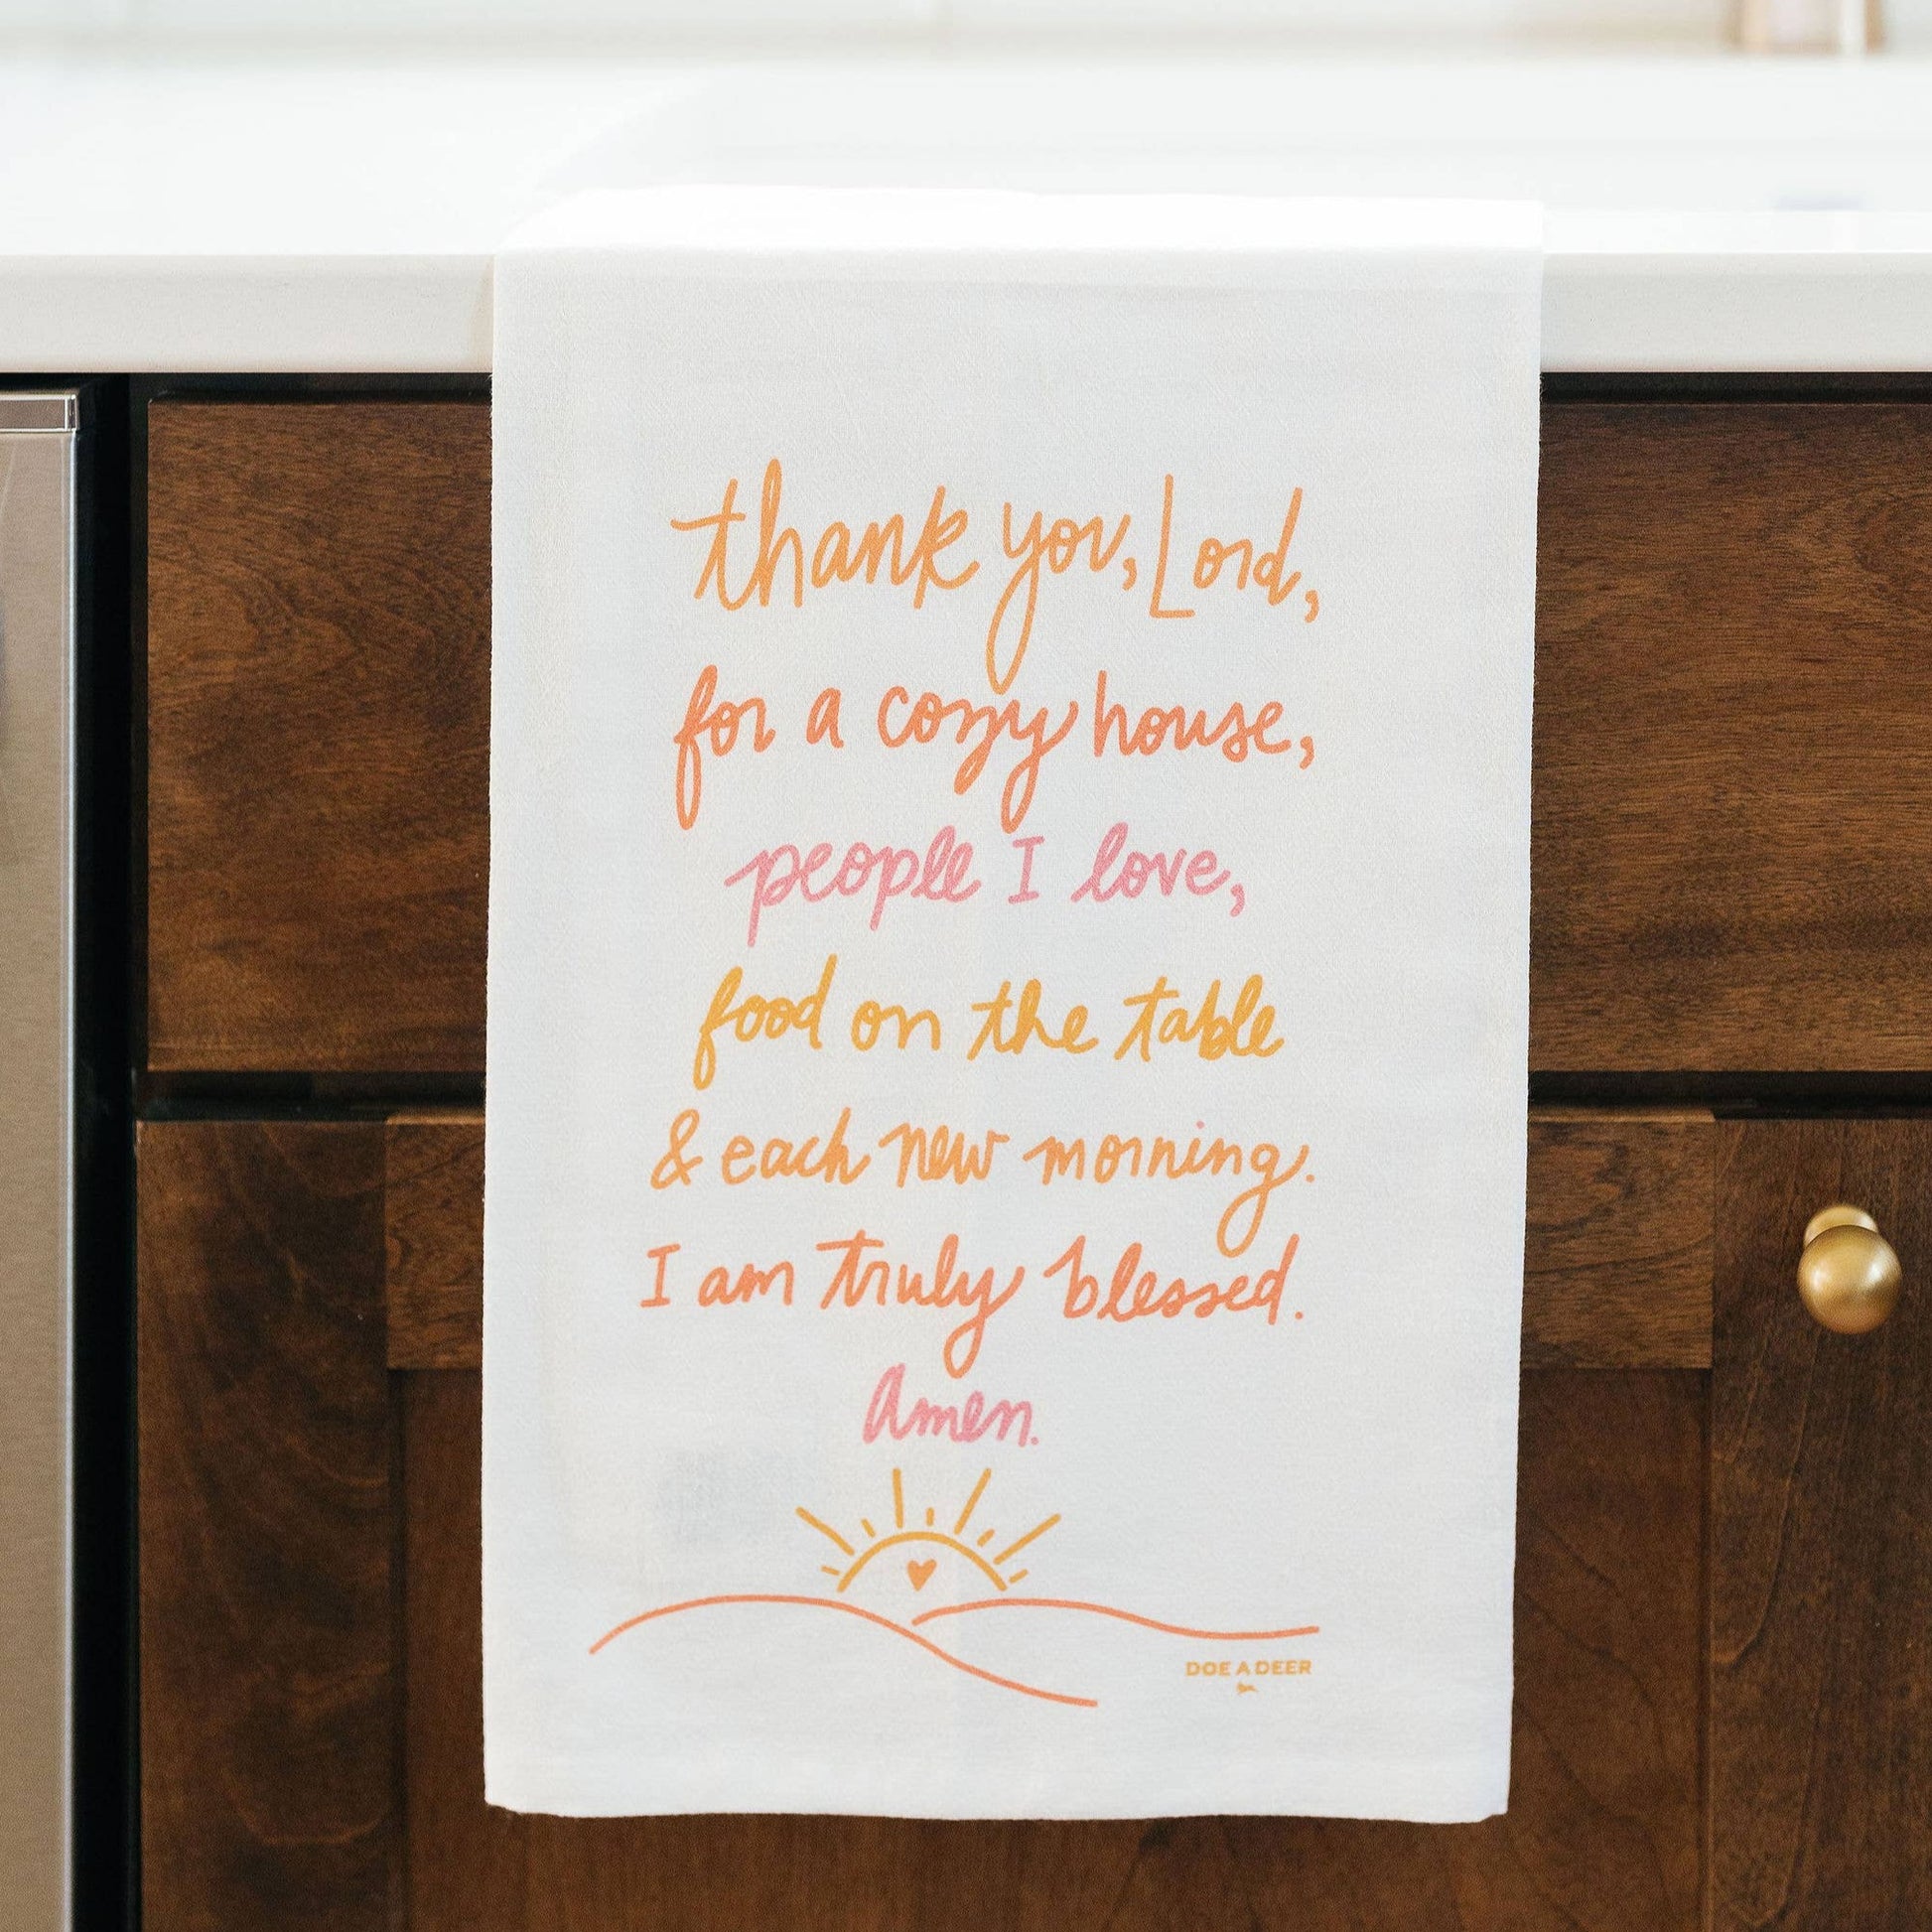 This tea towel design has shades of orange, pink and yellow on a white towel. 